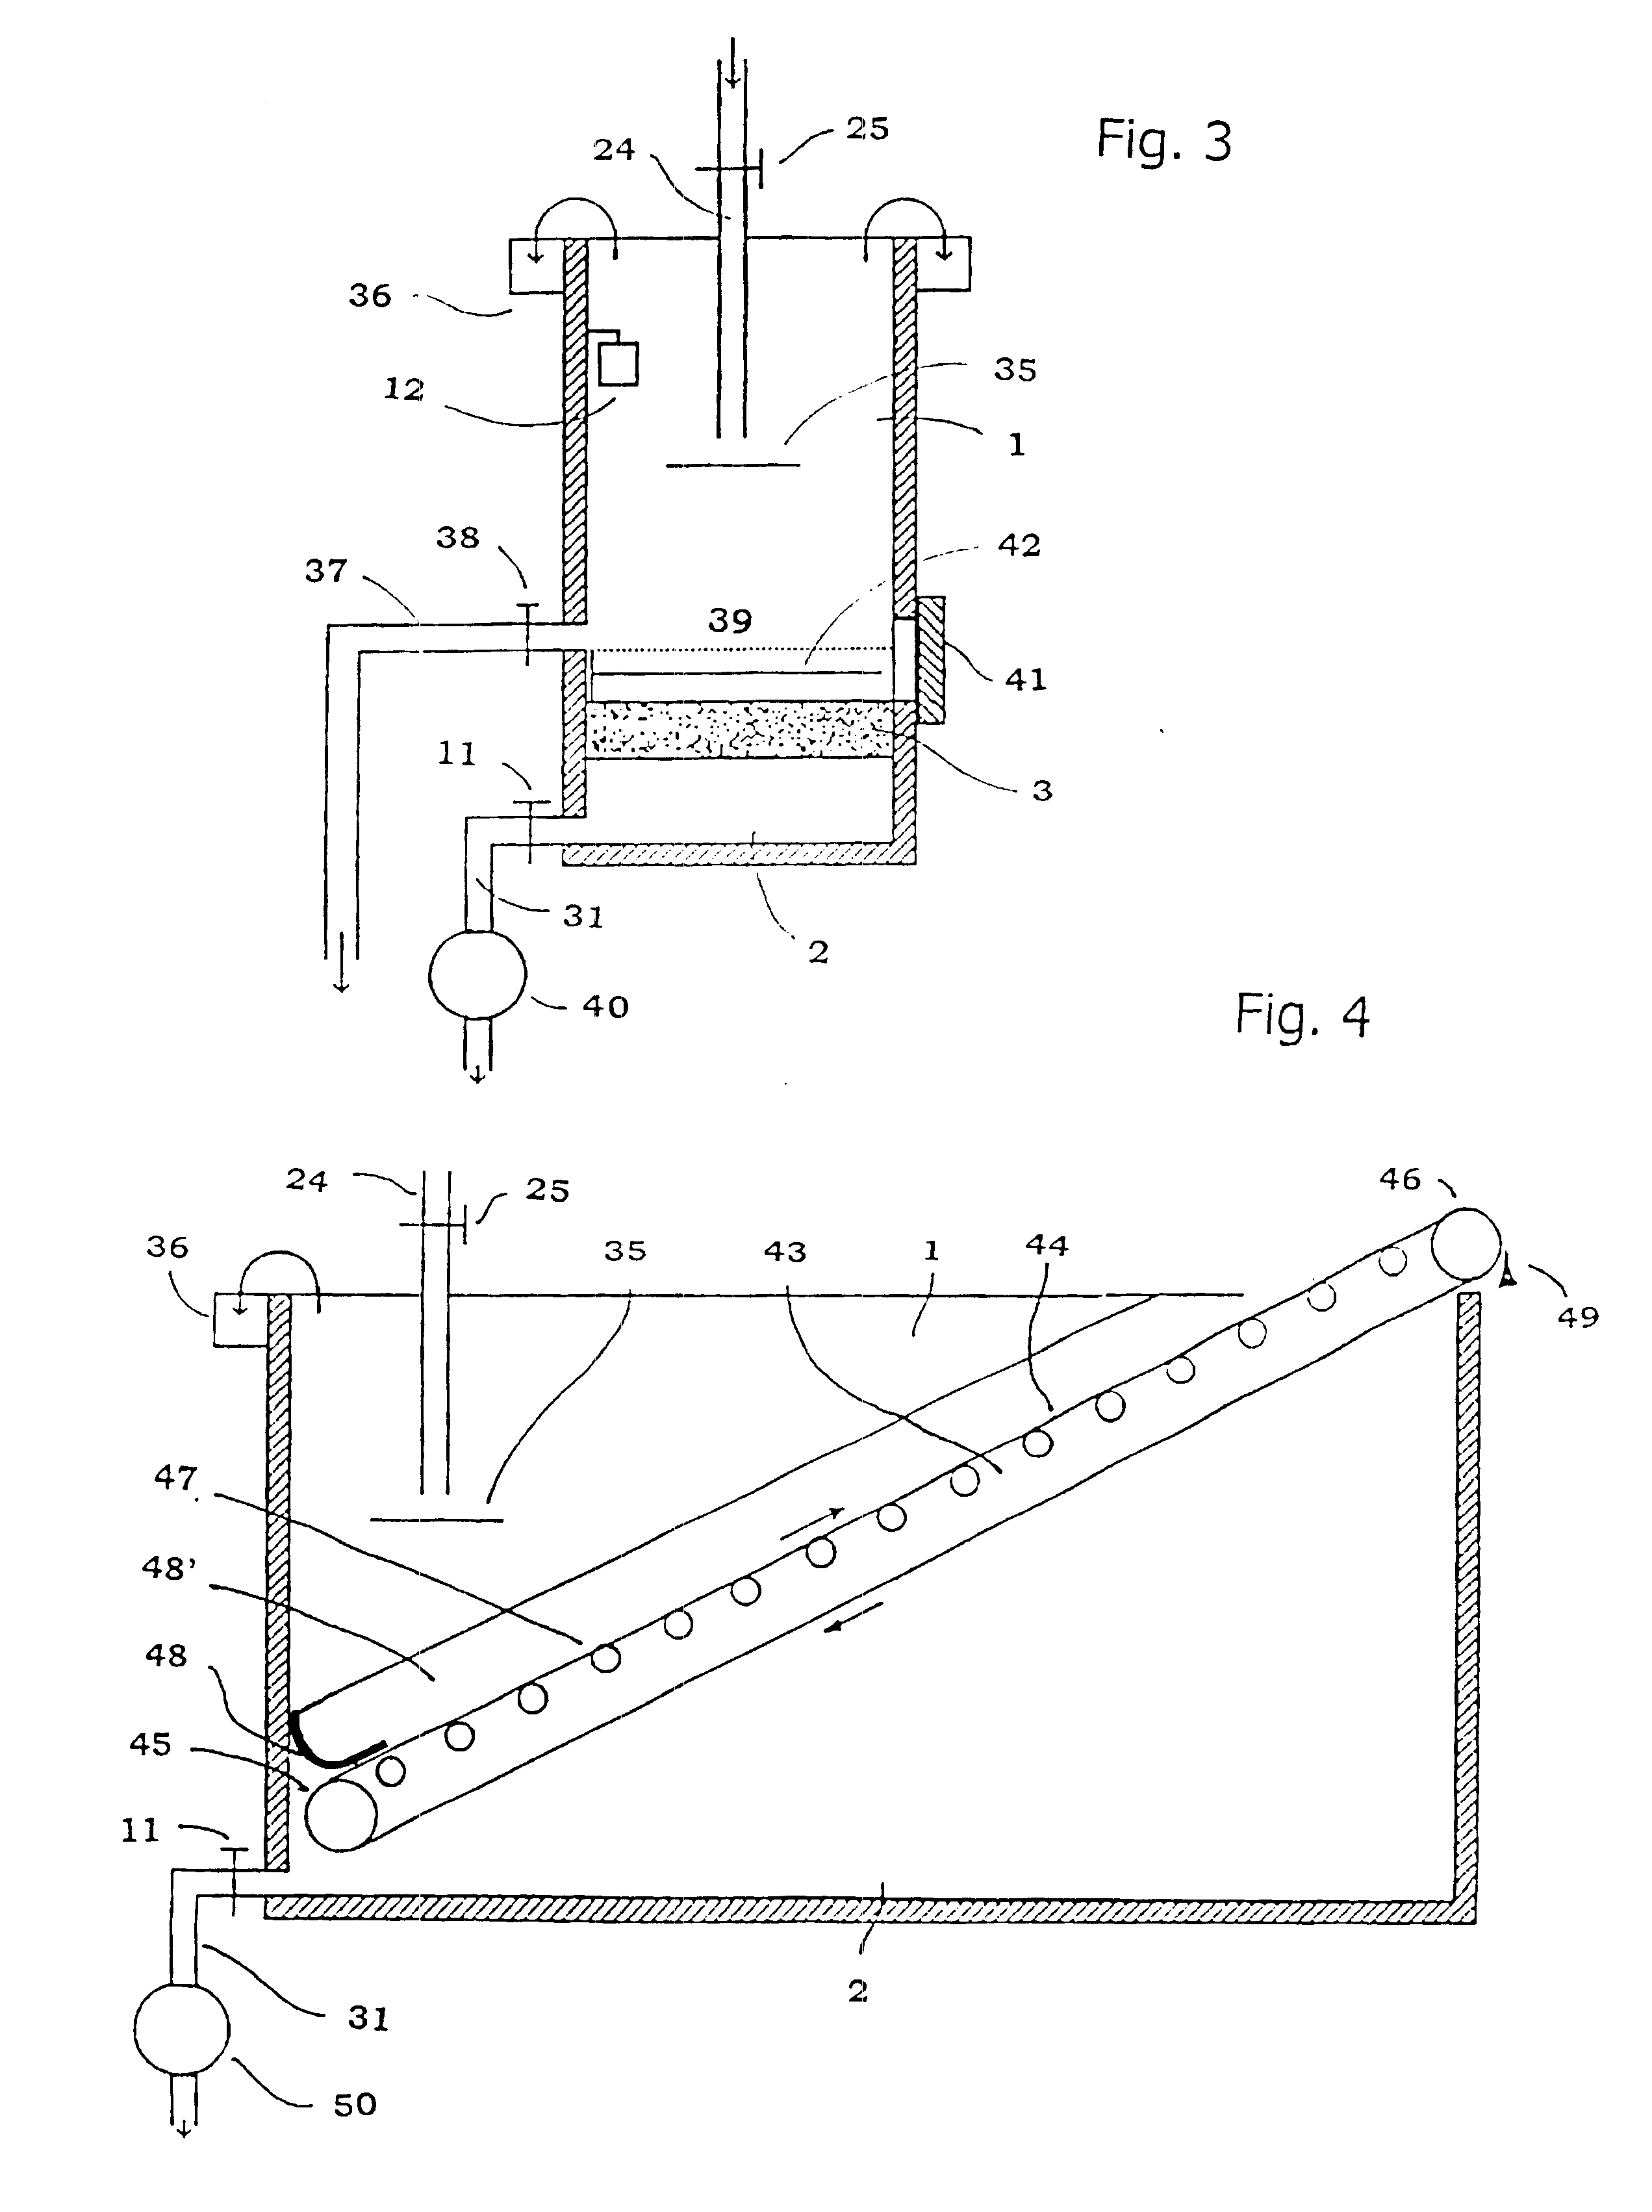 Method for settling of suspensions with use of seepage force and vibrations